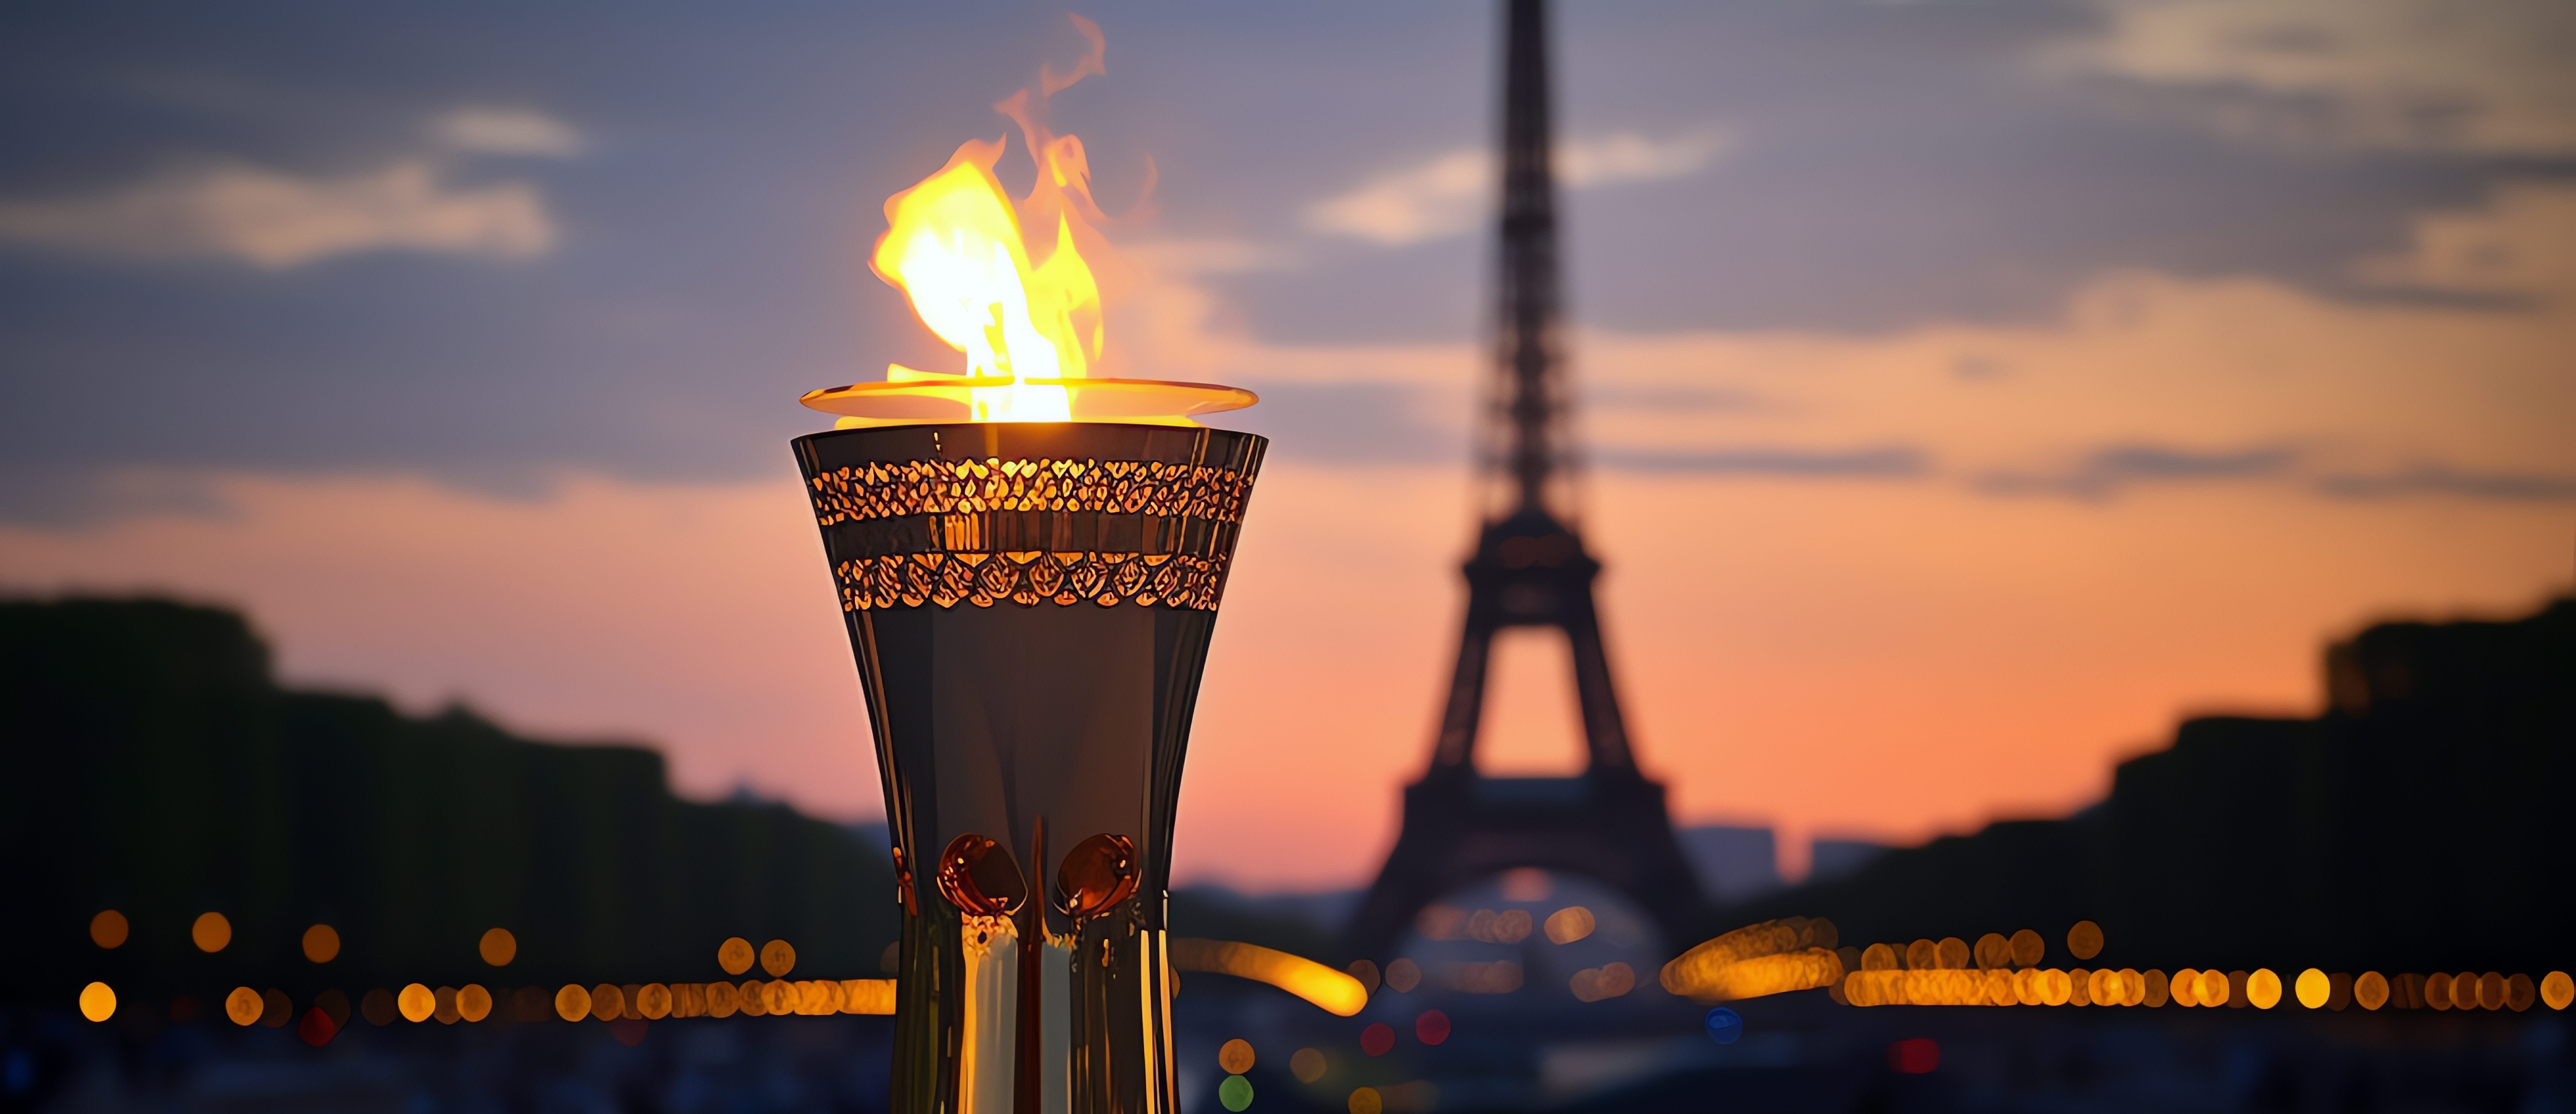  Flamme Olympique